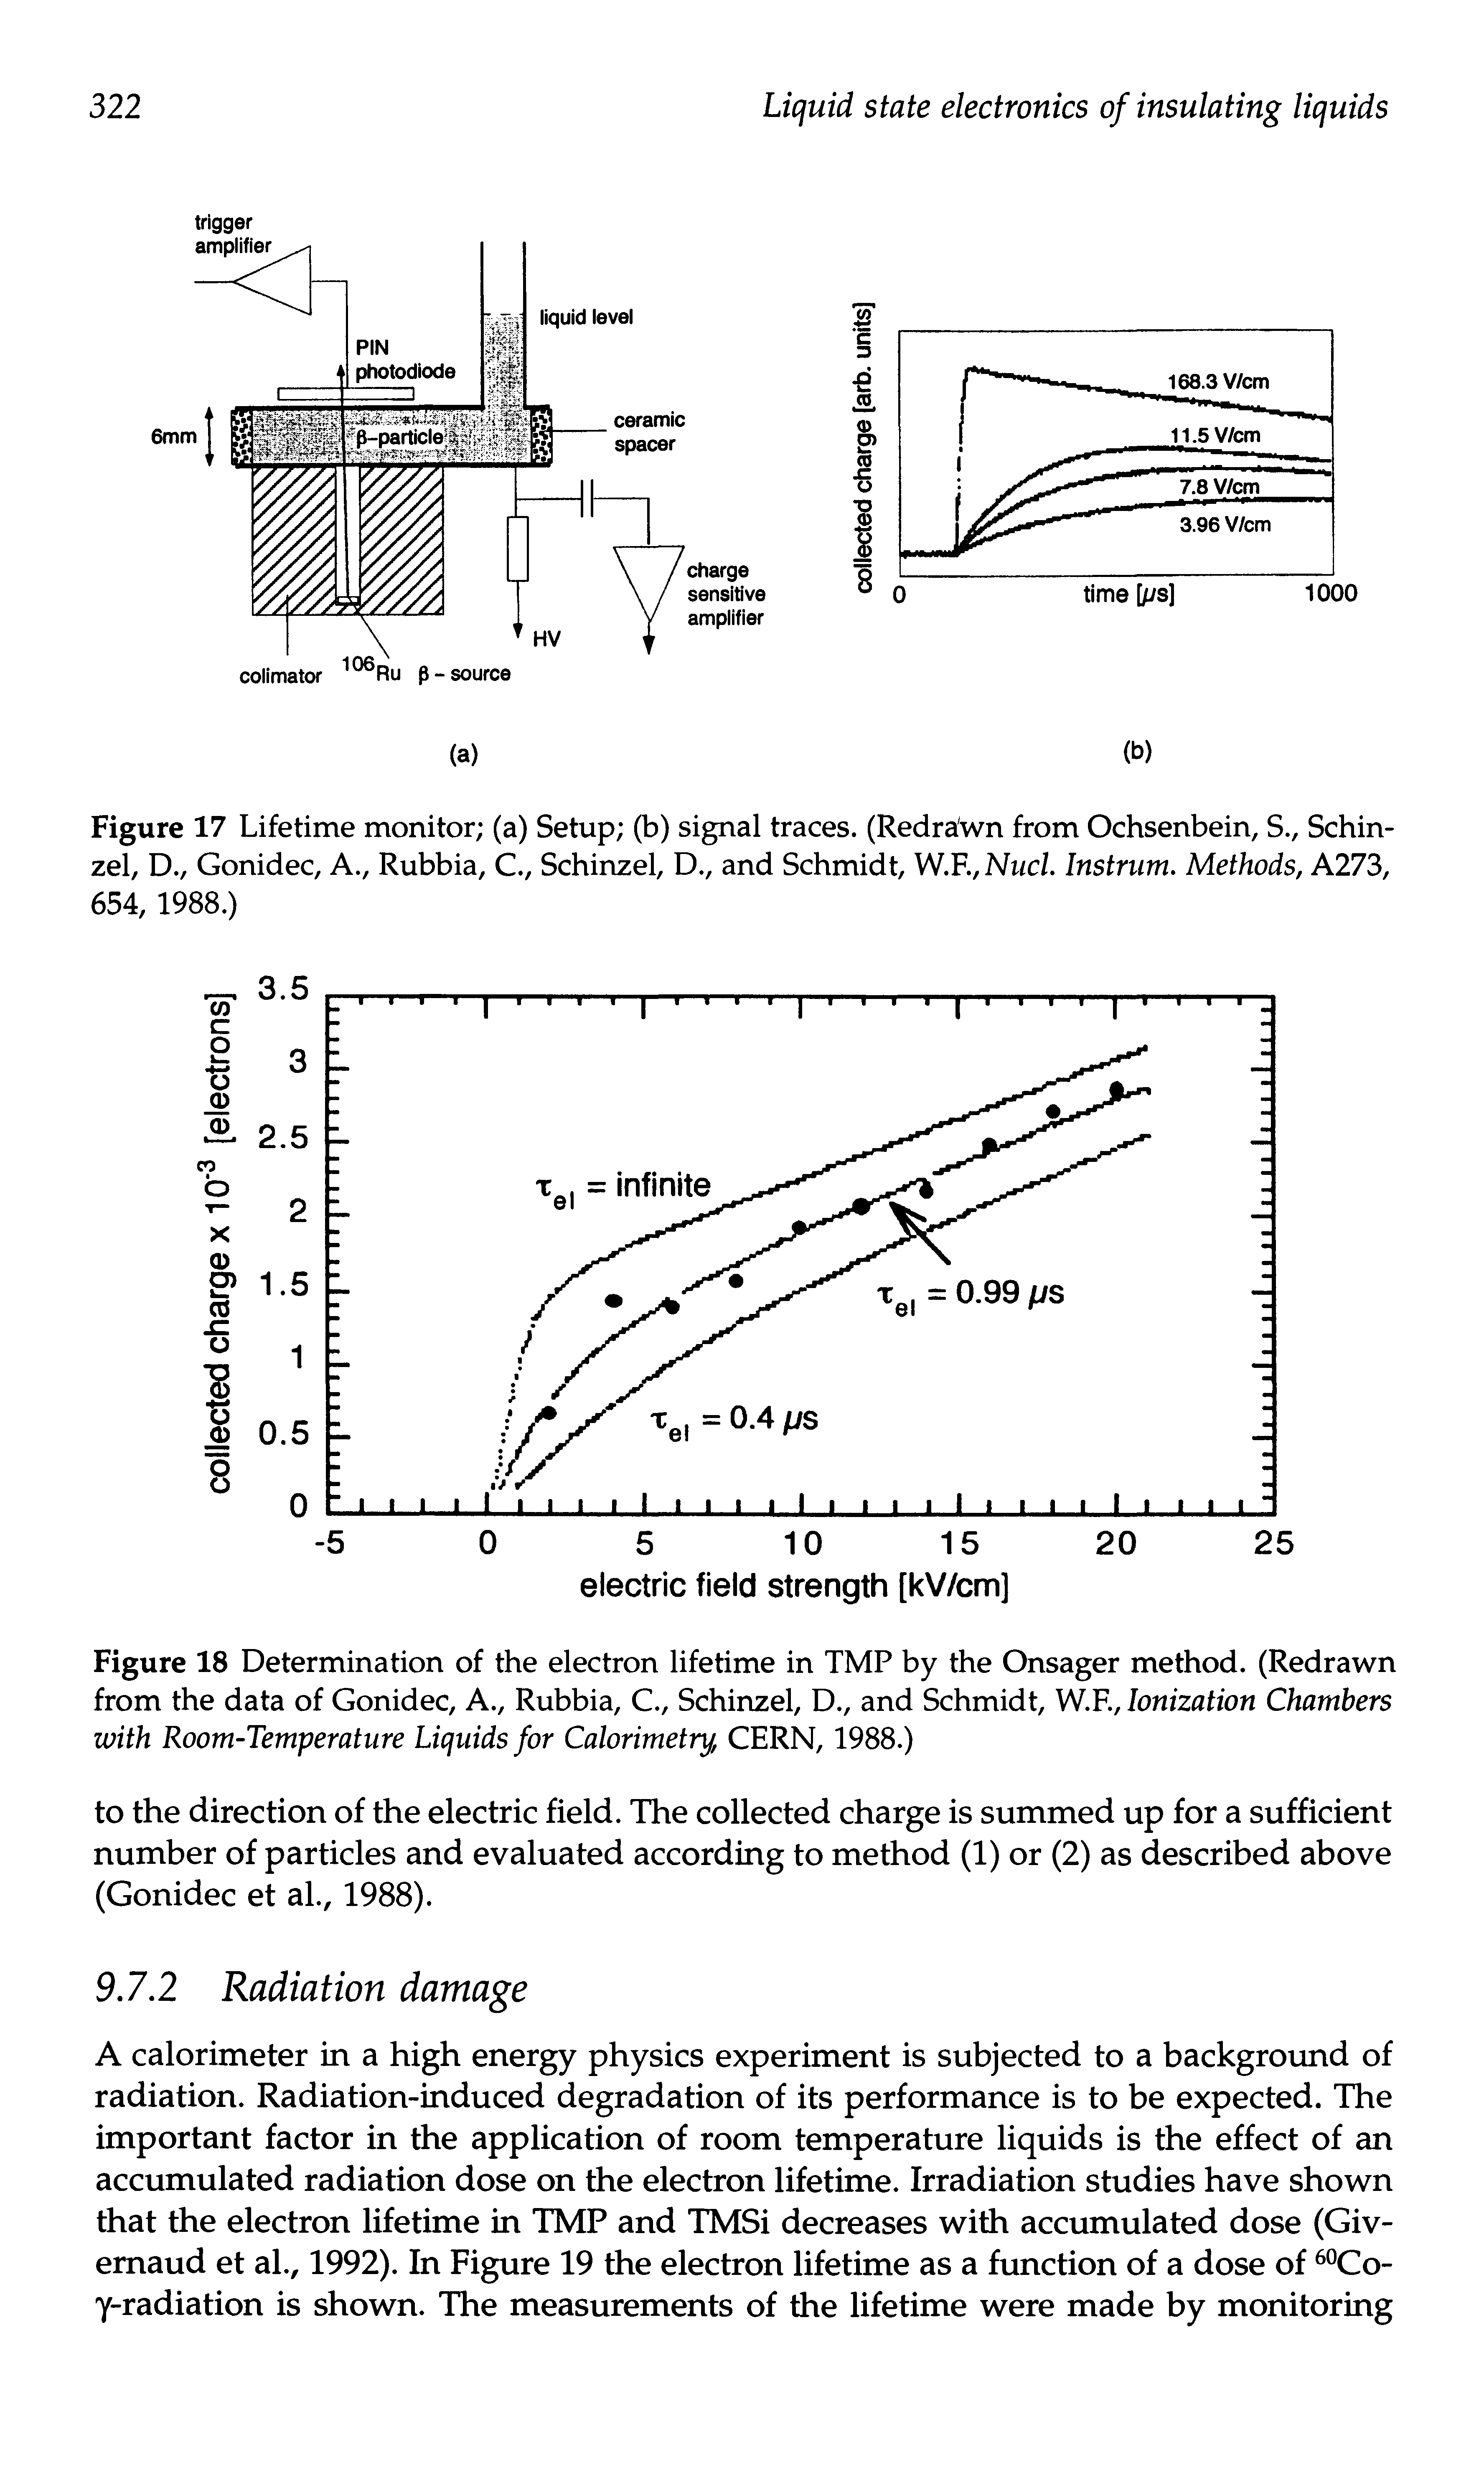 Figure 18 Determination of the electron lifetime in TMP by the Onsager method. (Redrawn from the data of Gonidec, A., Rubbia, C., Schinzel, D., and Schmidt, W.F., Ionization Chambers with Room-Temperature Liquids for Calorimetry, CERN, 1988.)...